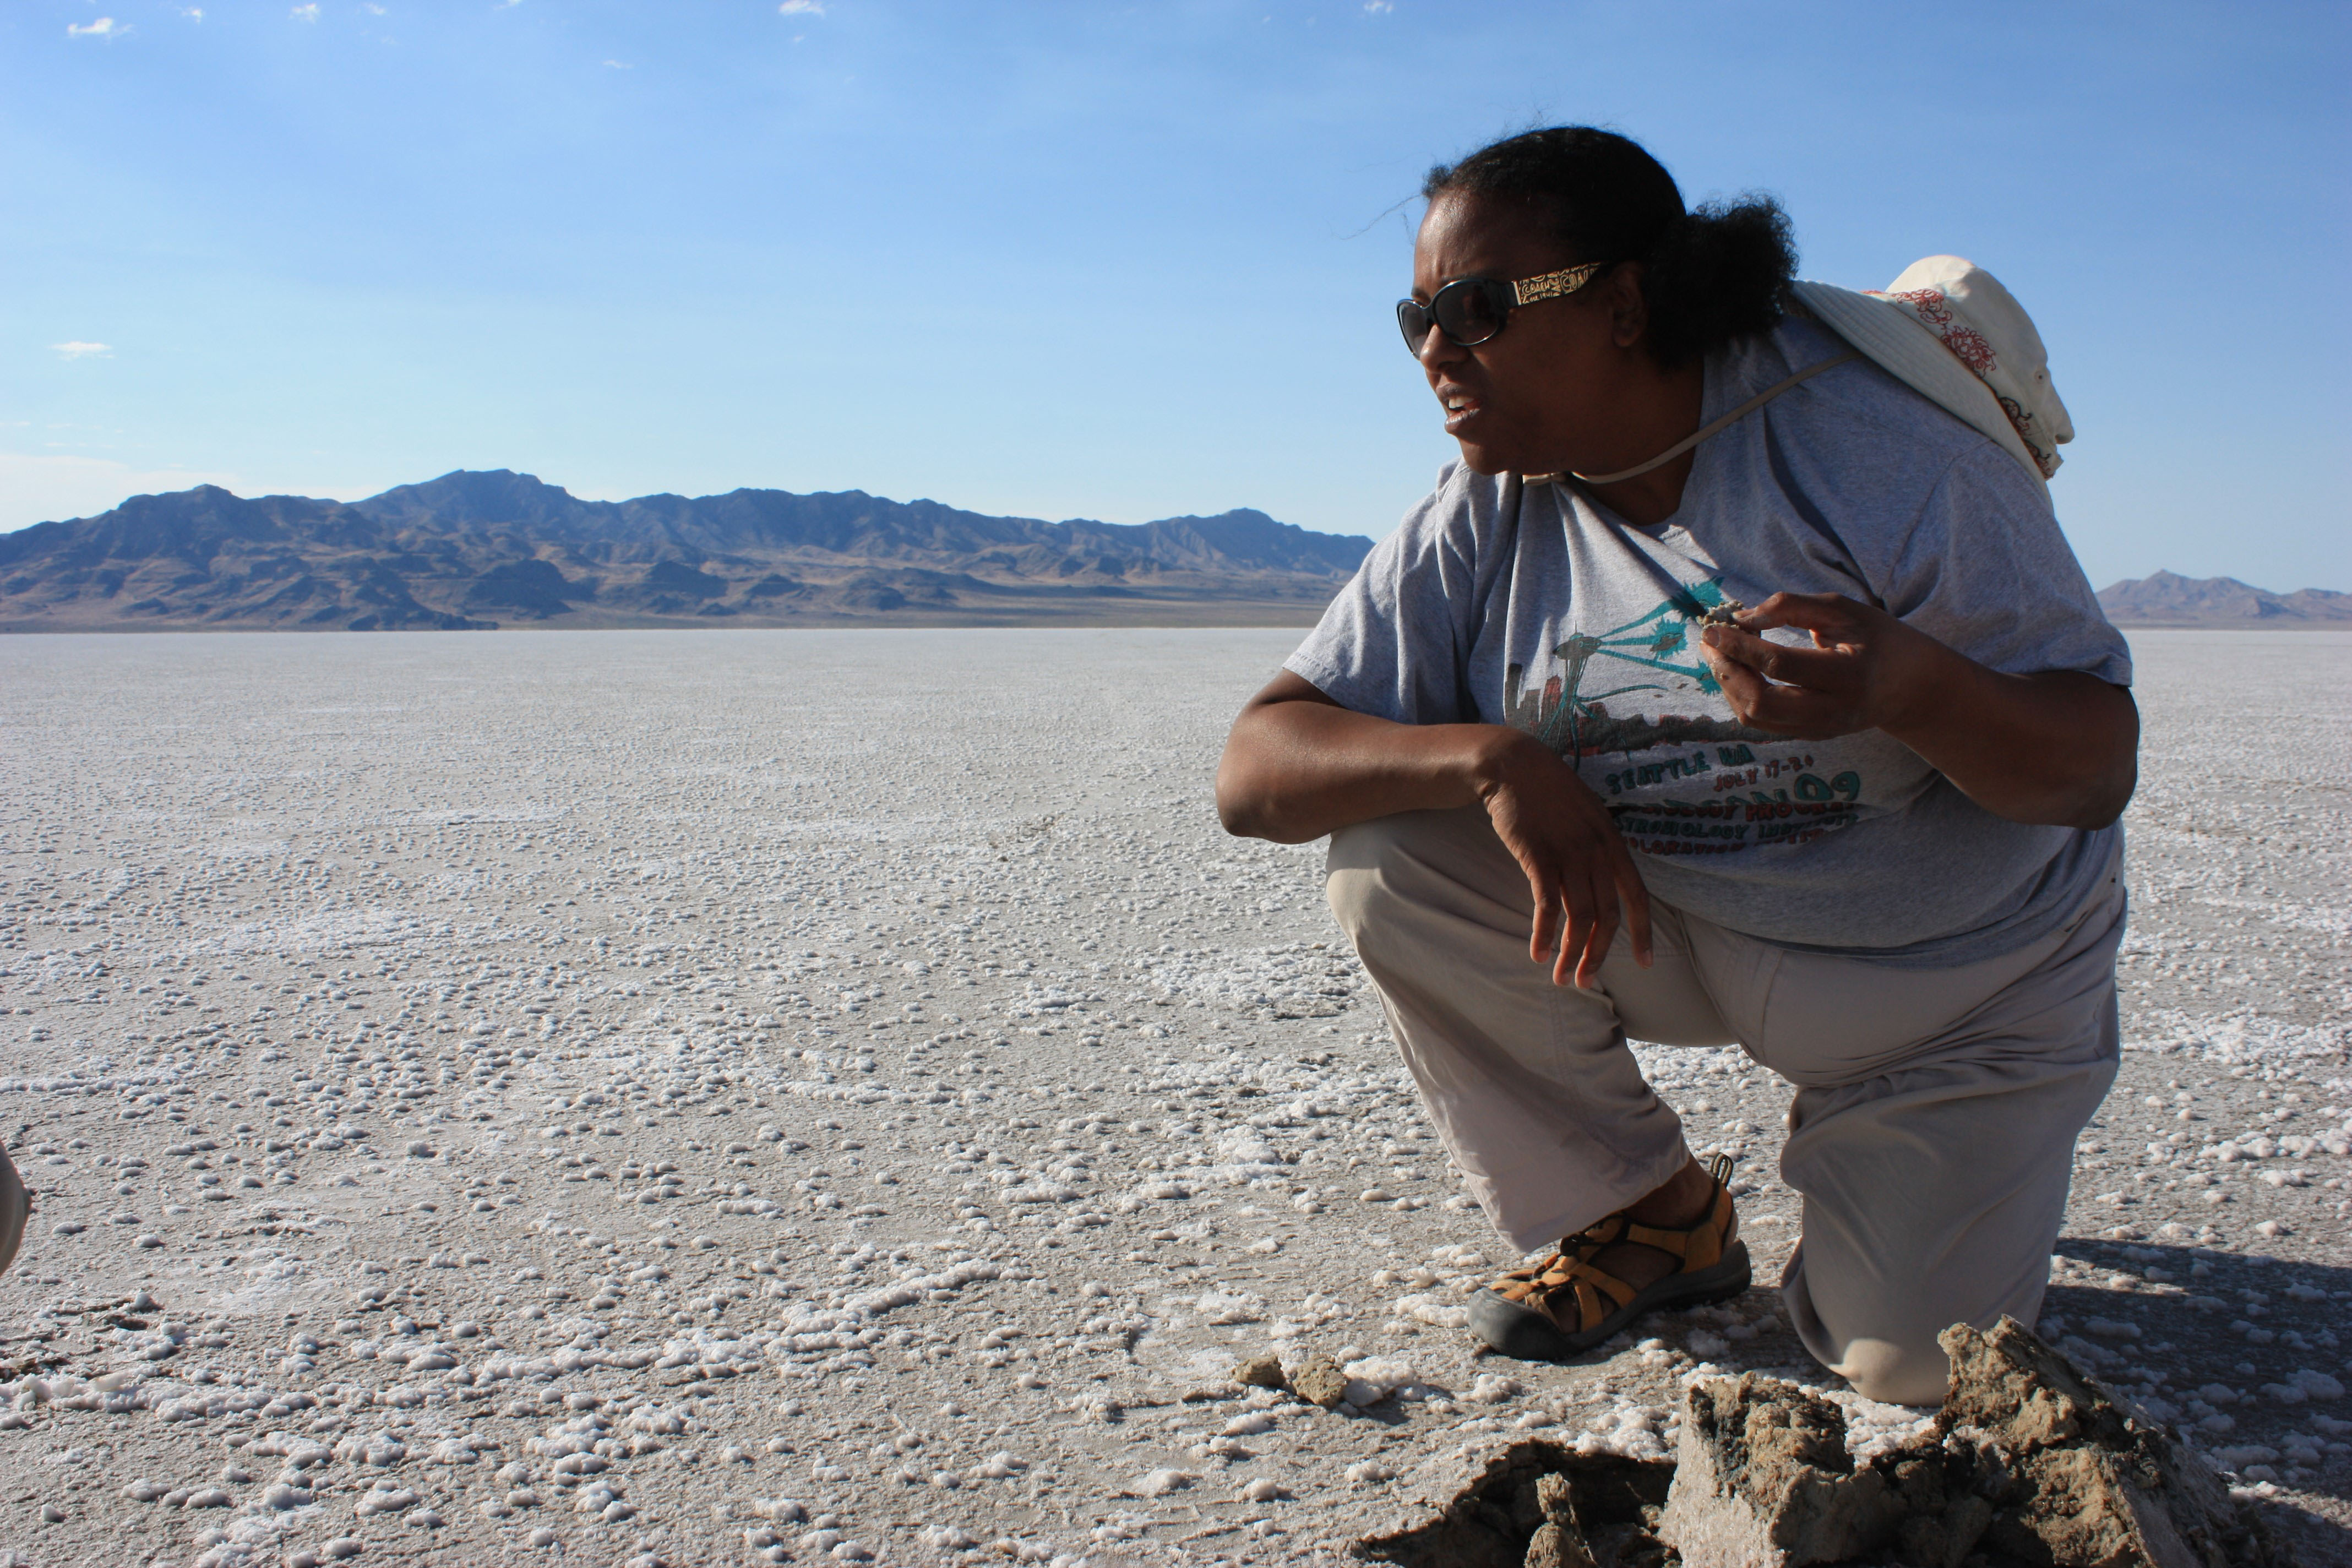 Astrobiologist Kennda Lynch Uses Analogs on Earth to Find Life on Mars